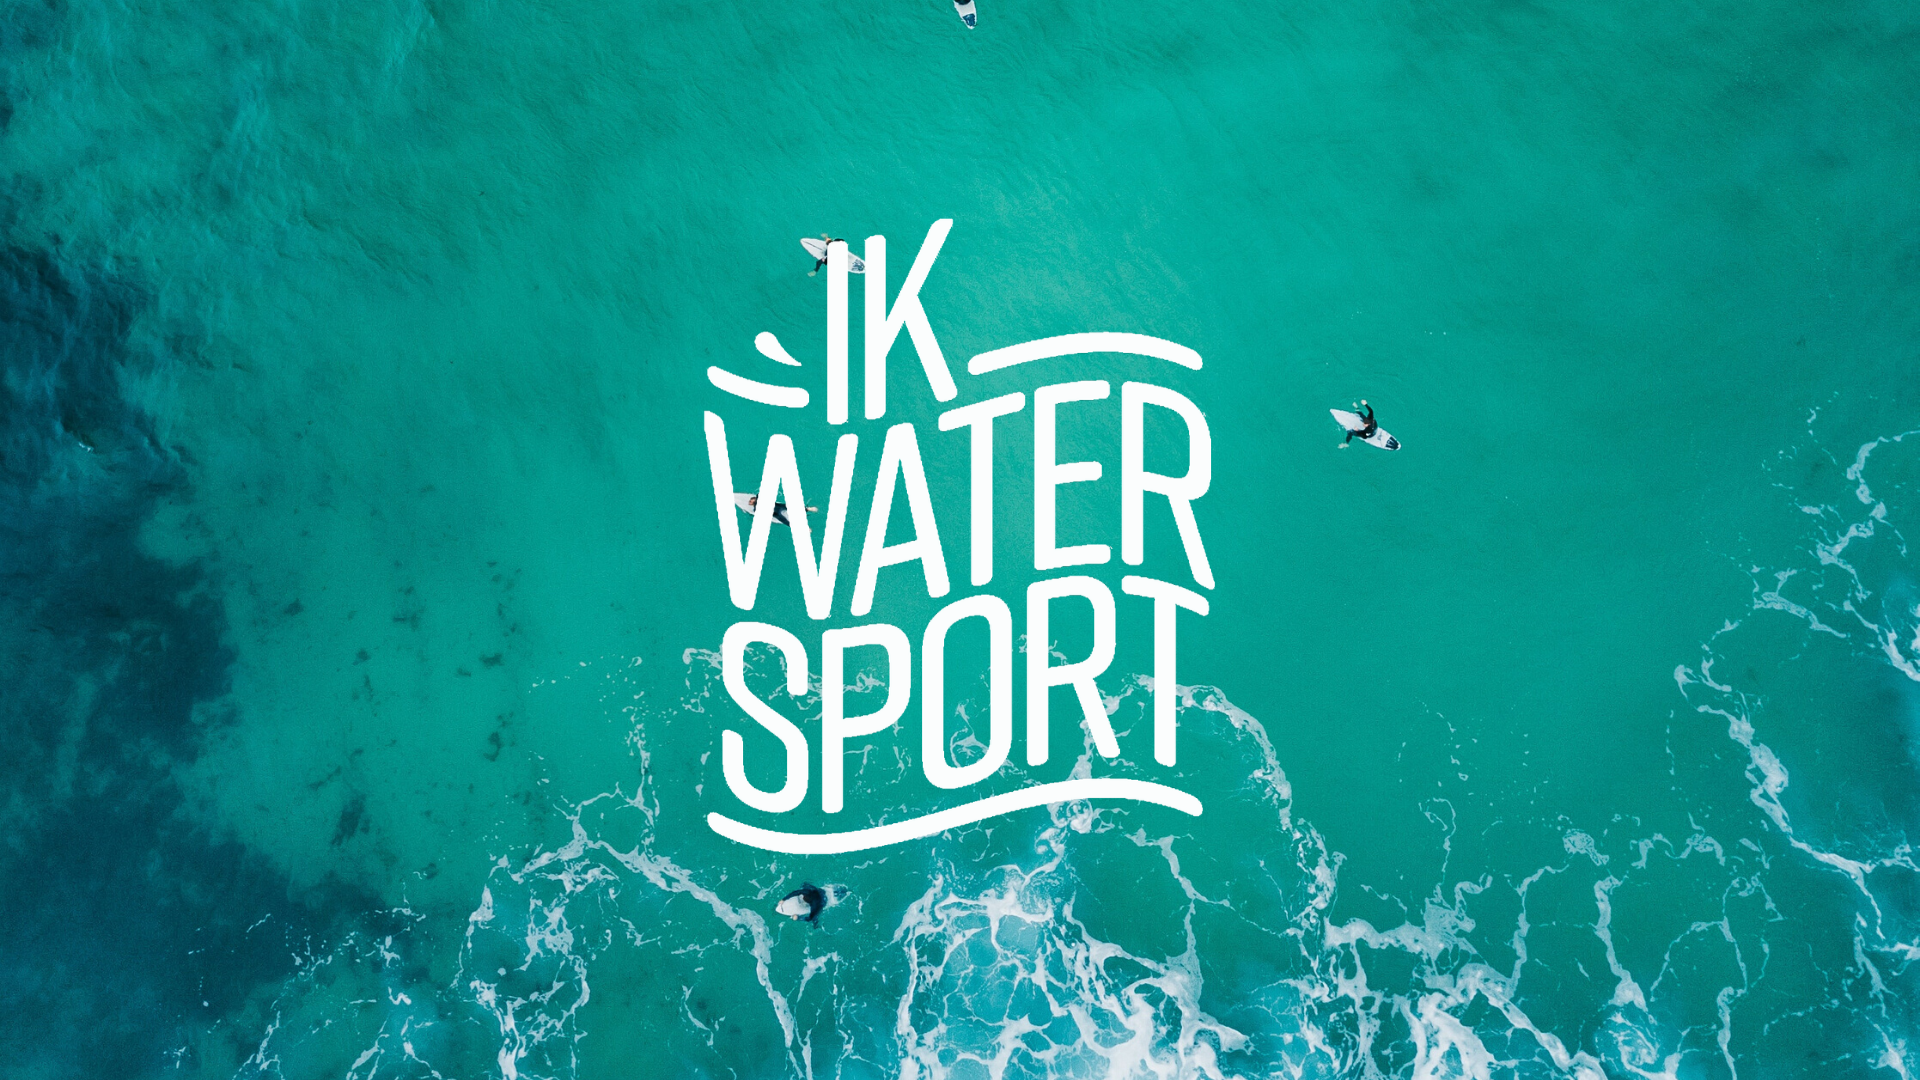 (c) Ikwatersport.be